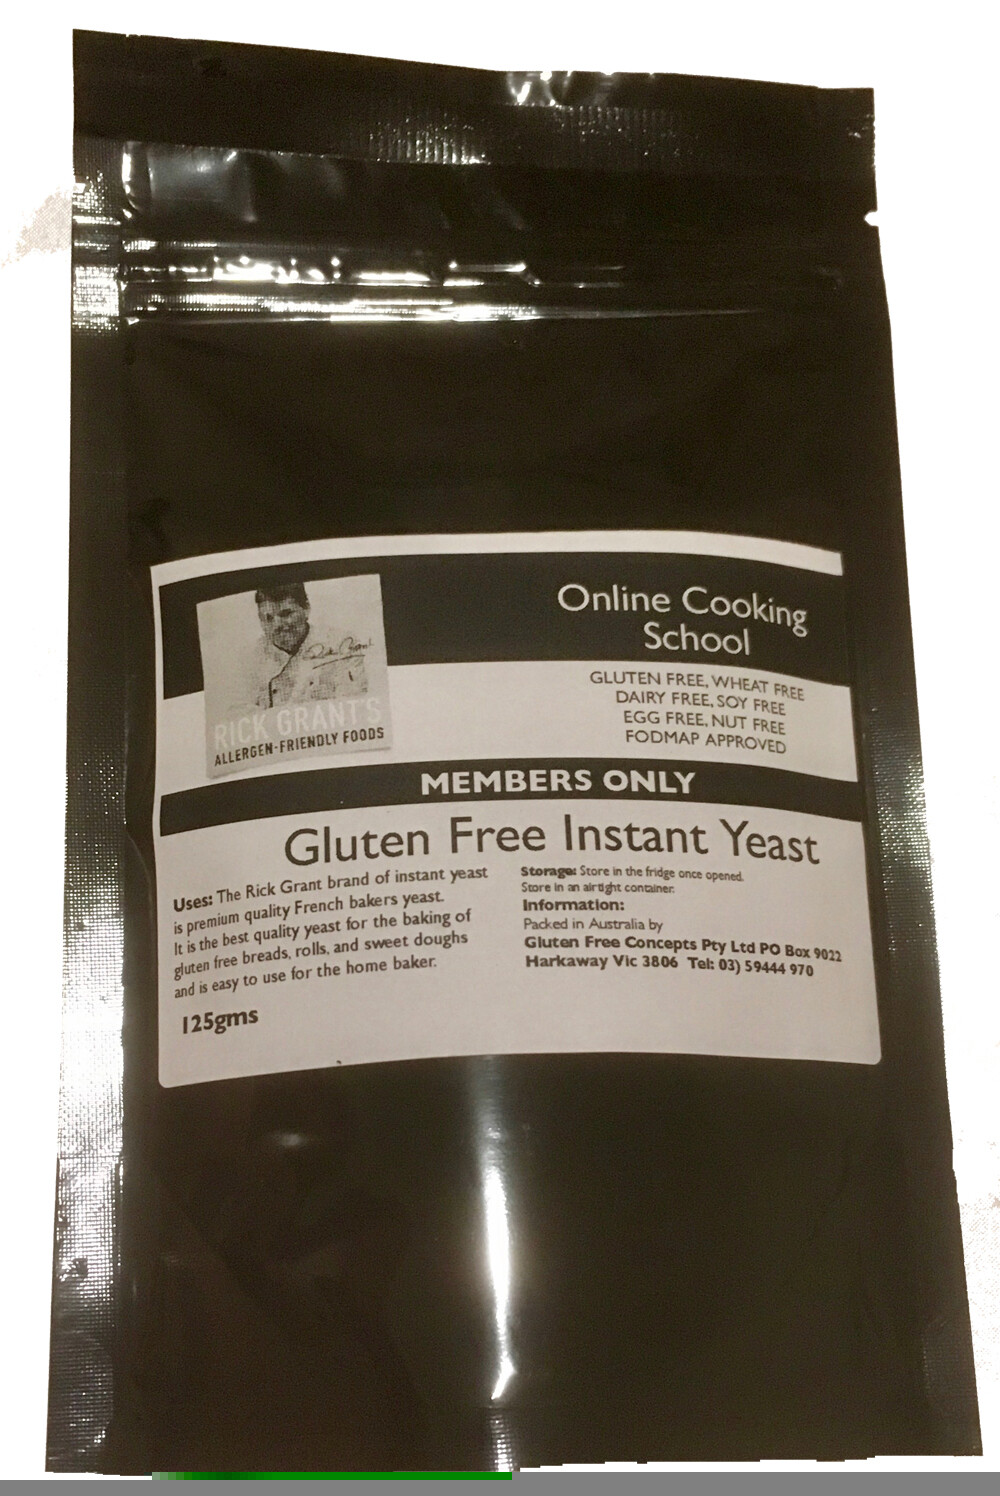 Gluten Free French Yeast
French Bakers Yeast. The best quality bakers yeast ideal for your Naan Bread, Pizza Base and OMG Bread Mix.